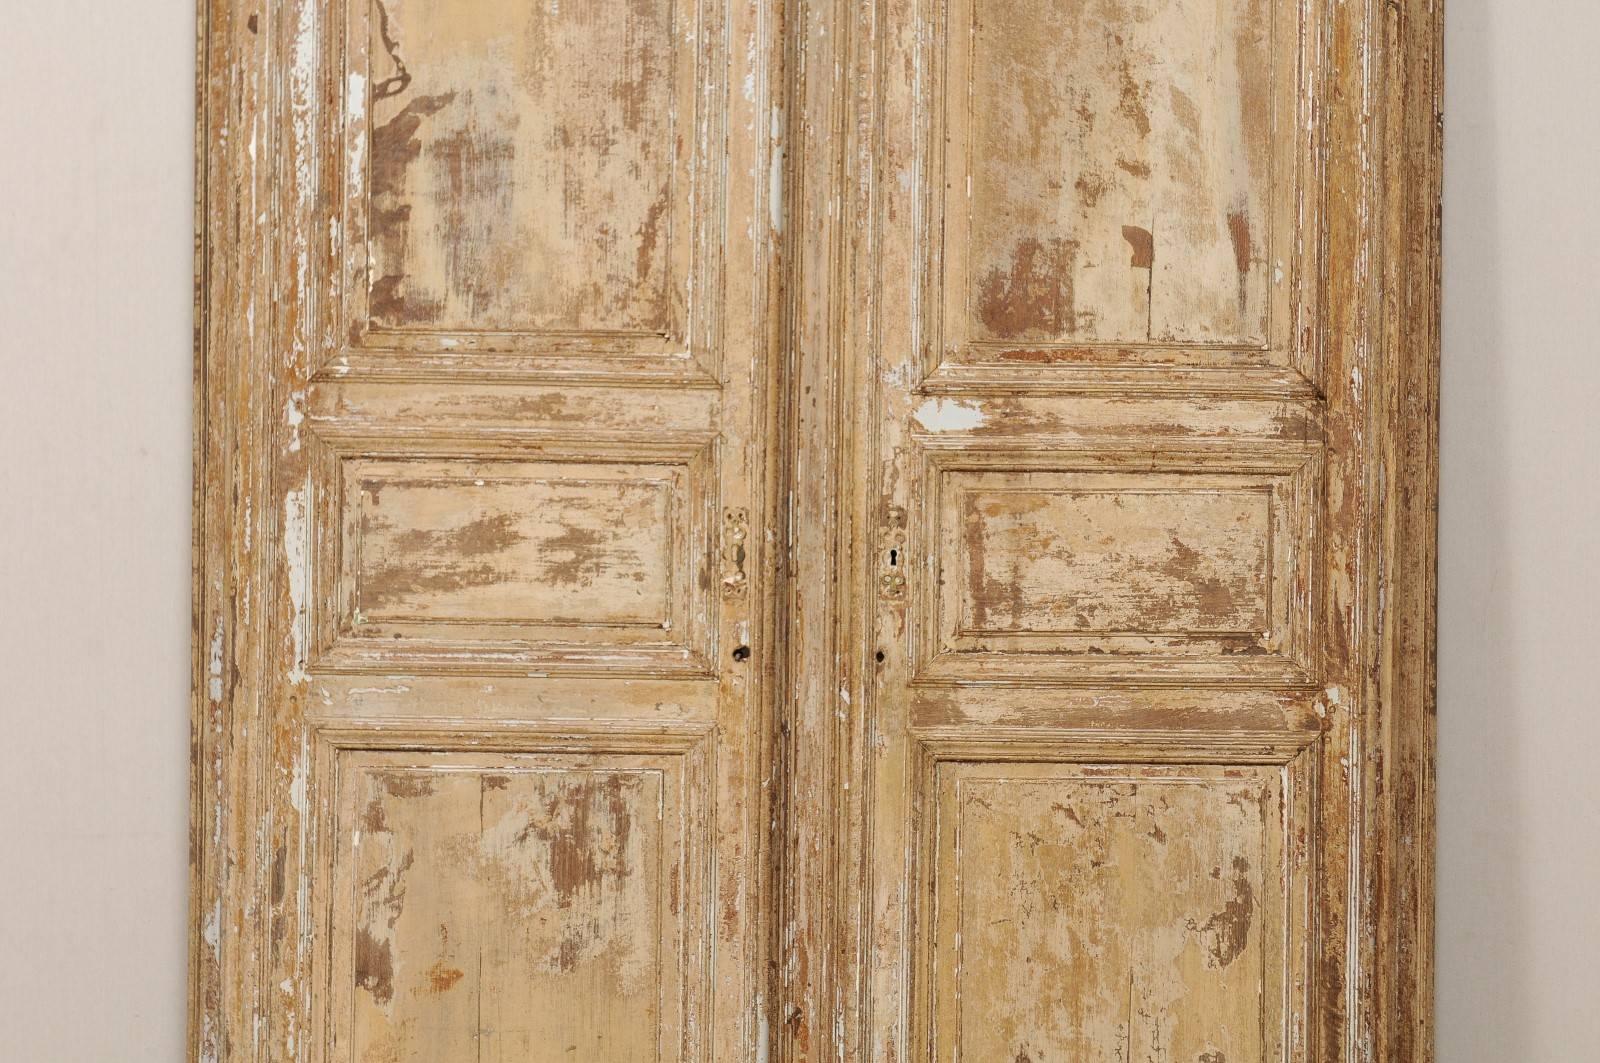 19th Century An Italian Pair of Early 19th C. Wood Doors Within Original Casing & Molding For Sale